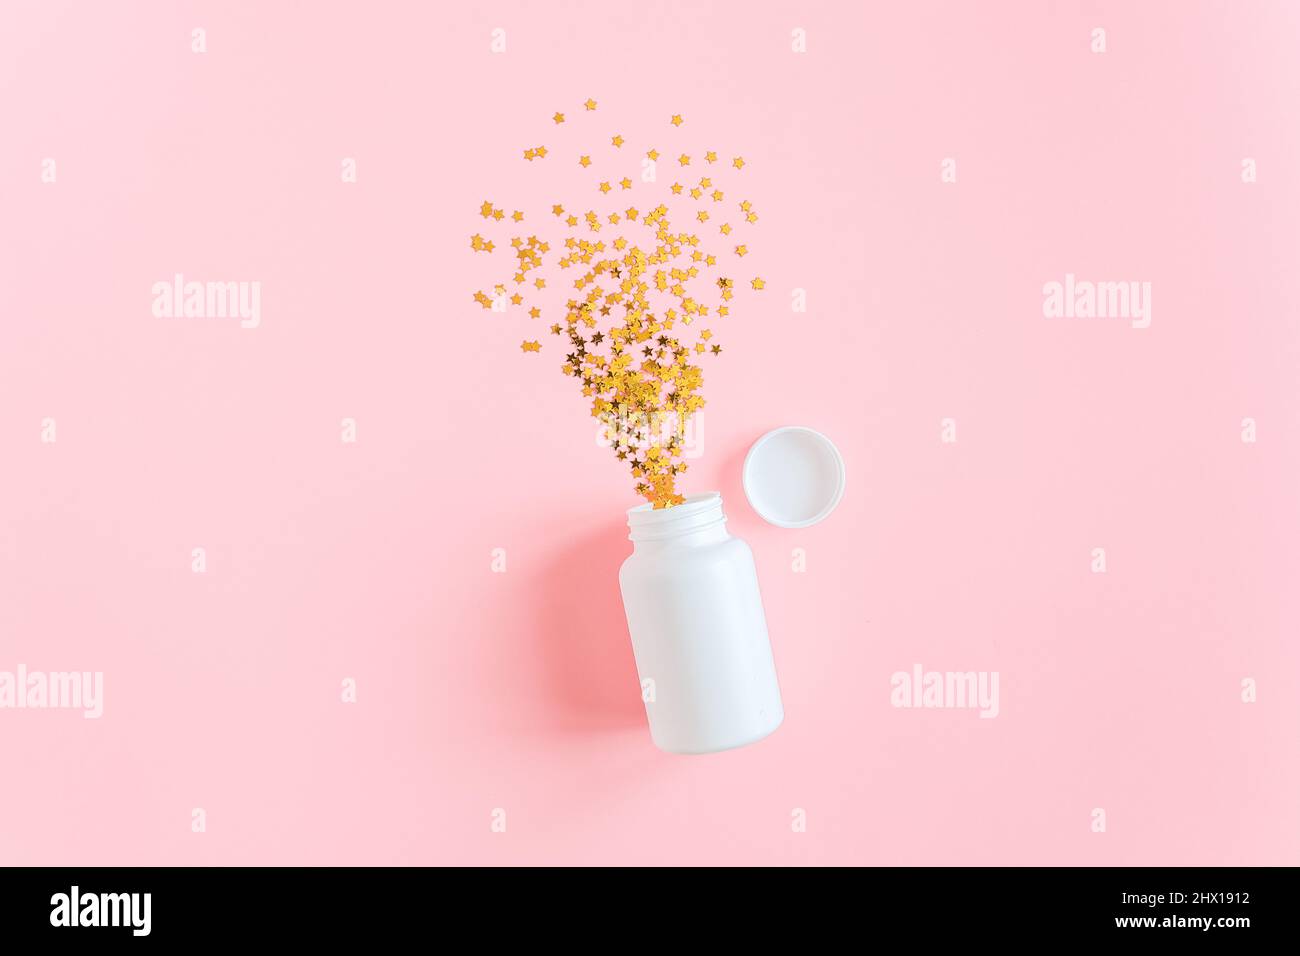 Gold stars confetti fly out white medical bottle on pink background. Concept sleeping pills, melatonin for insomnia, therapy with antidepressants for Stock Photo